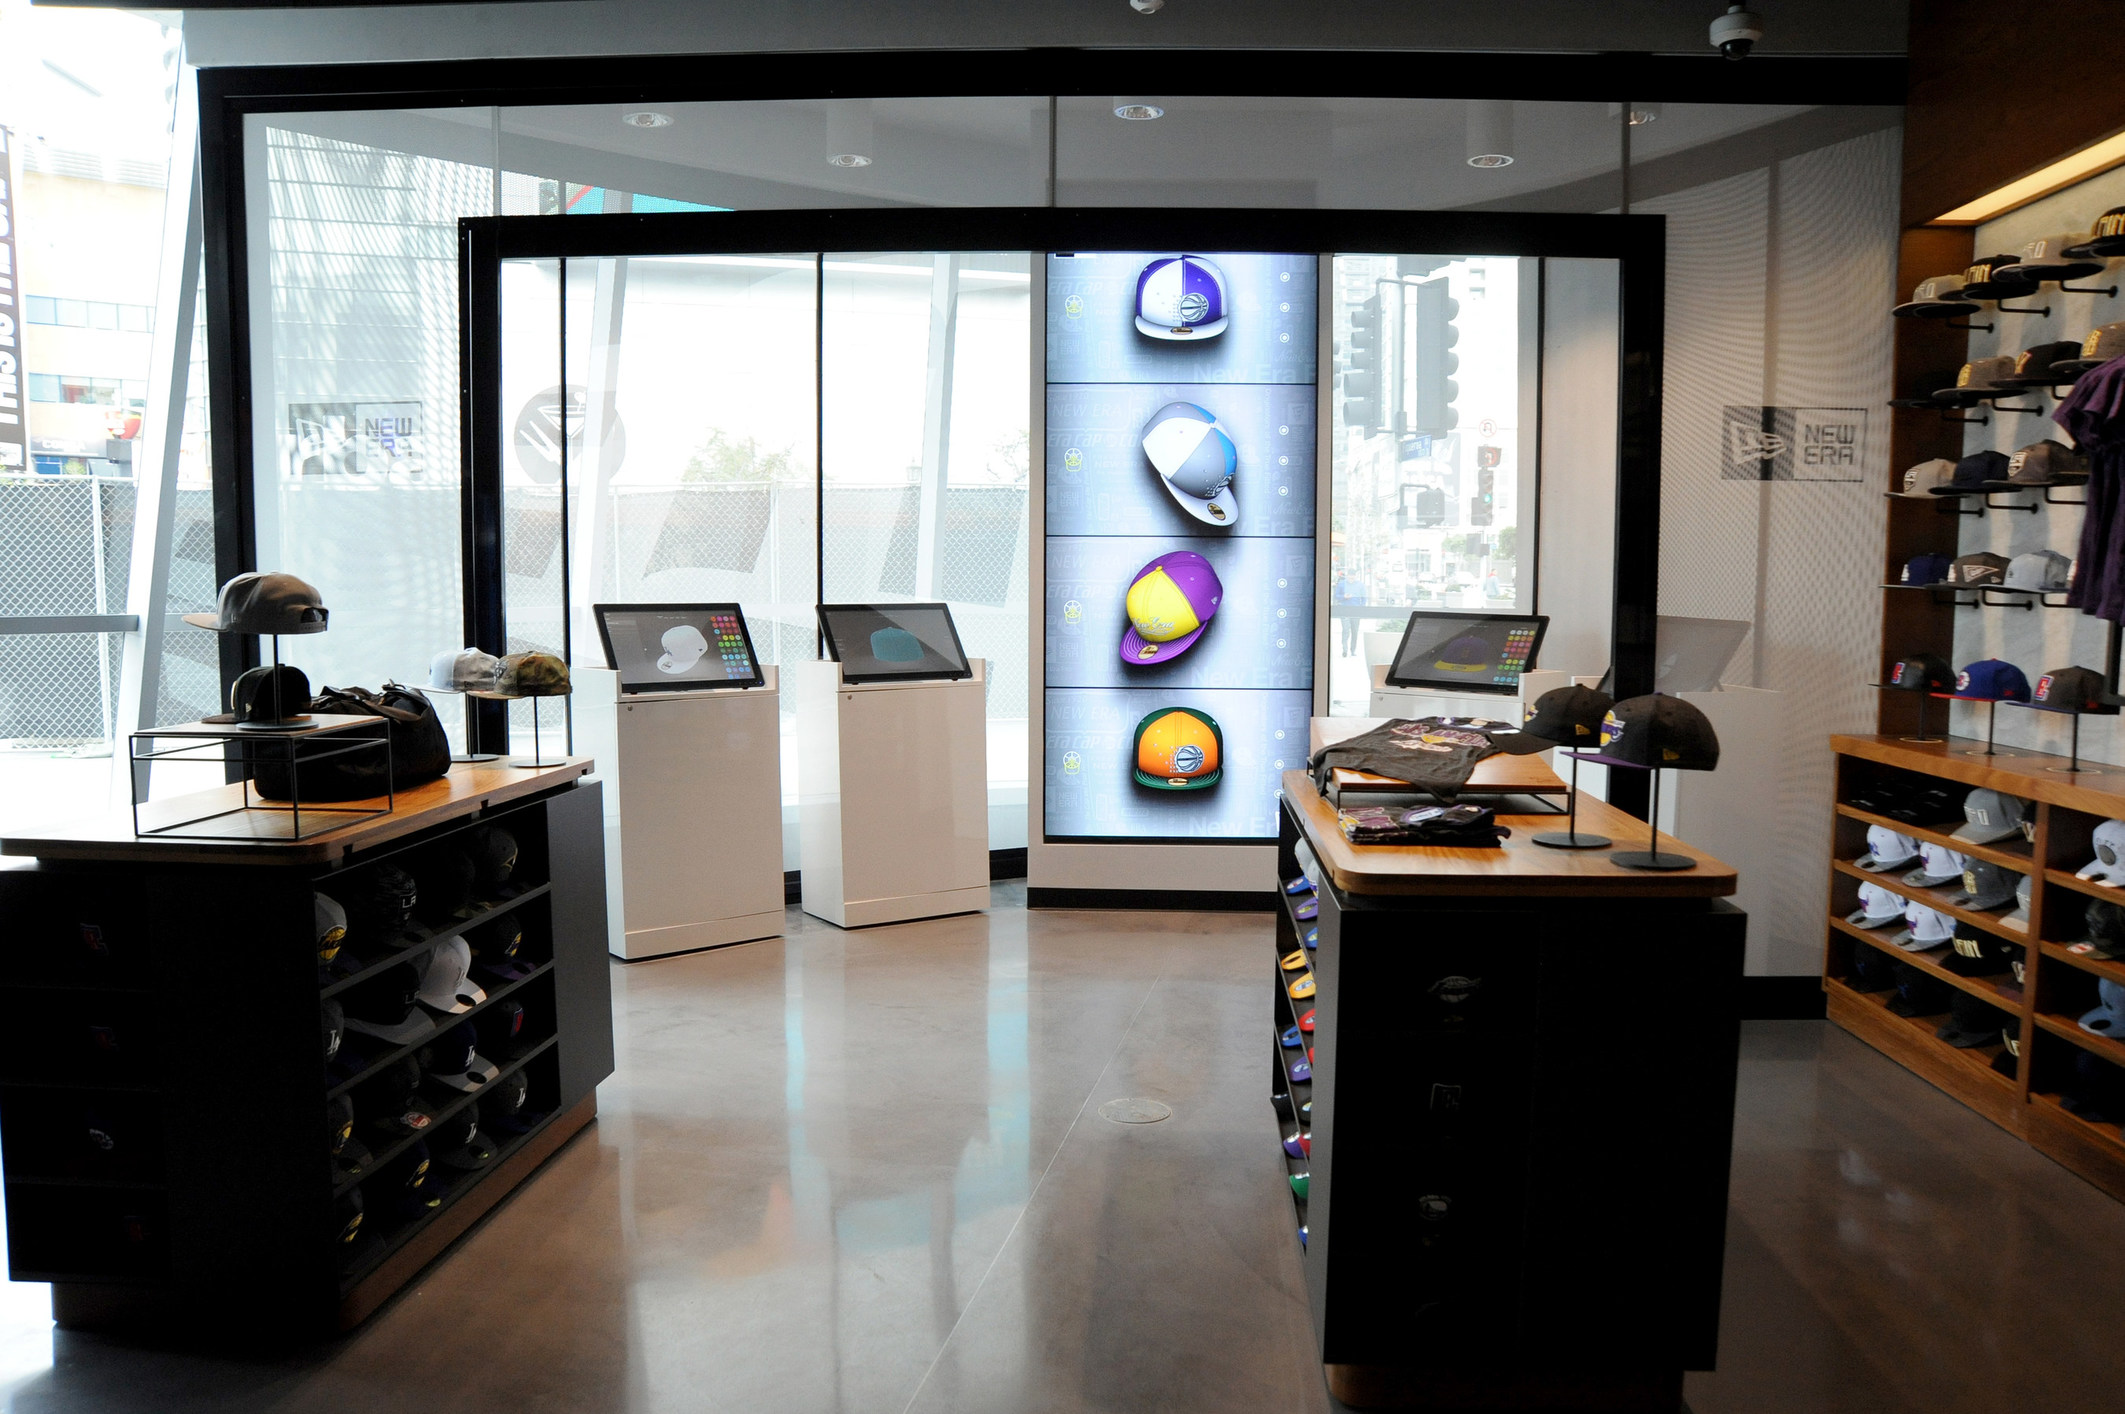 New Era Opens the D-Lab Store at L.A. Live where You Can Customize